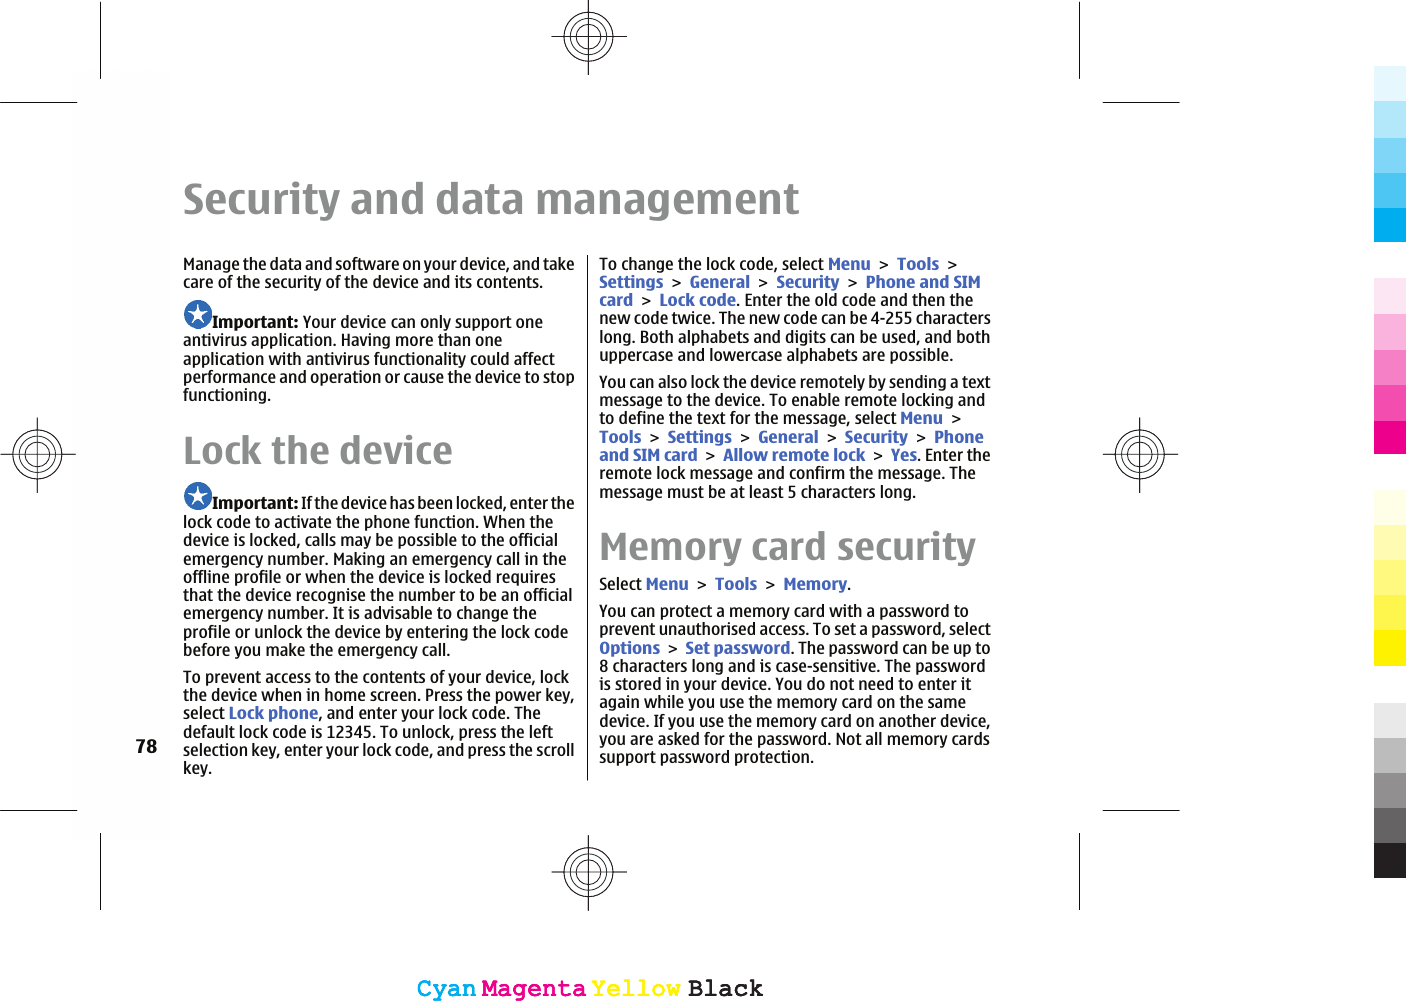 Security and data managementManage the data and software on your device, and takecare of the security of the device and its contents.Important: Your device can only support oneantivirus application. Having more than oneapplication with antivirus functionality could affectperformance and operation or cause the device to stopfunctioning.Lock the deviceImportant: If the device has been locked, enter thelock code to activate the phone function. When thedevice is locked, calls may be possible to the officialemergency number. Making an emergency call in theoffline profile or when the device is locked requiresthat the device recognise the number to be an officialemergency number. It is advisable to change theprofile or unlock the device by entering the lock codebefore you make the emergency call.To prevent access to the contents of your device, lockthe device when in home screen. Press the power key,select Lock phone, and enter your lock code. Thedefault lock code is 12345. To unlock, press the leftselection key, enter your lock code, and press the scrollkey.To change the lock code, select MenuToolsSettingsGeneralSecurityPhone and SIMcardLock code. Enter the old code and then thenew code twice. The new code can be 4-255 characterslong. Both alphabets and digits can be used, and bothuppercase and lowercase alphabets are possible.You can also lock the device remotely by sending a textmessage to the device. To enable remote locking andto define the text for the message, select MenuToolsSettingsGeneralSecurityPhoneand SIM cardAllow remote lockYes. Enter theremote lock message and confirm the message. Themessage must be at least 5 characters long.Memory card securitySelect MenuToolsMemory.You can protect a memory card with a password toprevent unauthorised access. To set a password, selectOptionsSet password. The password can be up to8 characters long and is case-sensitive. The passwordis stored in your device. You do not need to enter itagain while you use the memory card on the samedevice. If you use the memory card on another device,you are asked for the password. Not all memory cardssupport password protection.78CyanCyanMagentaMagentaYellowYellowBlackBlackCyanCyanMagentaMagentaYellowYellowBlackBlack